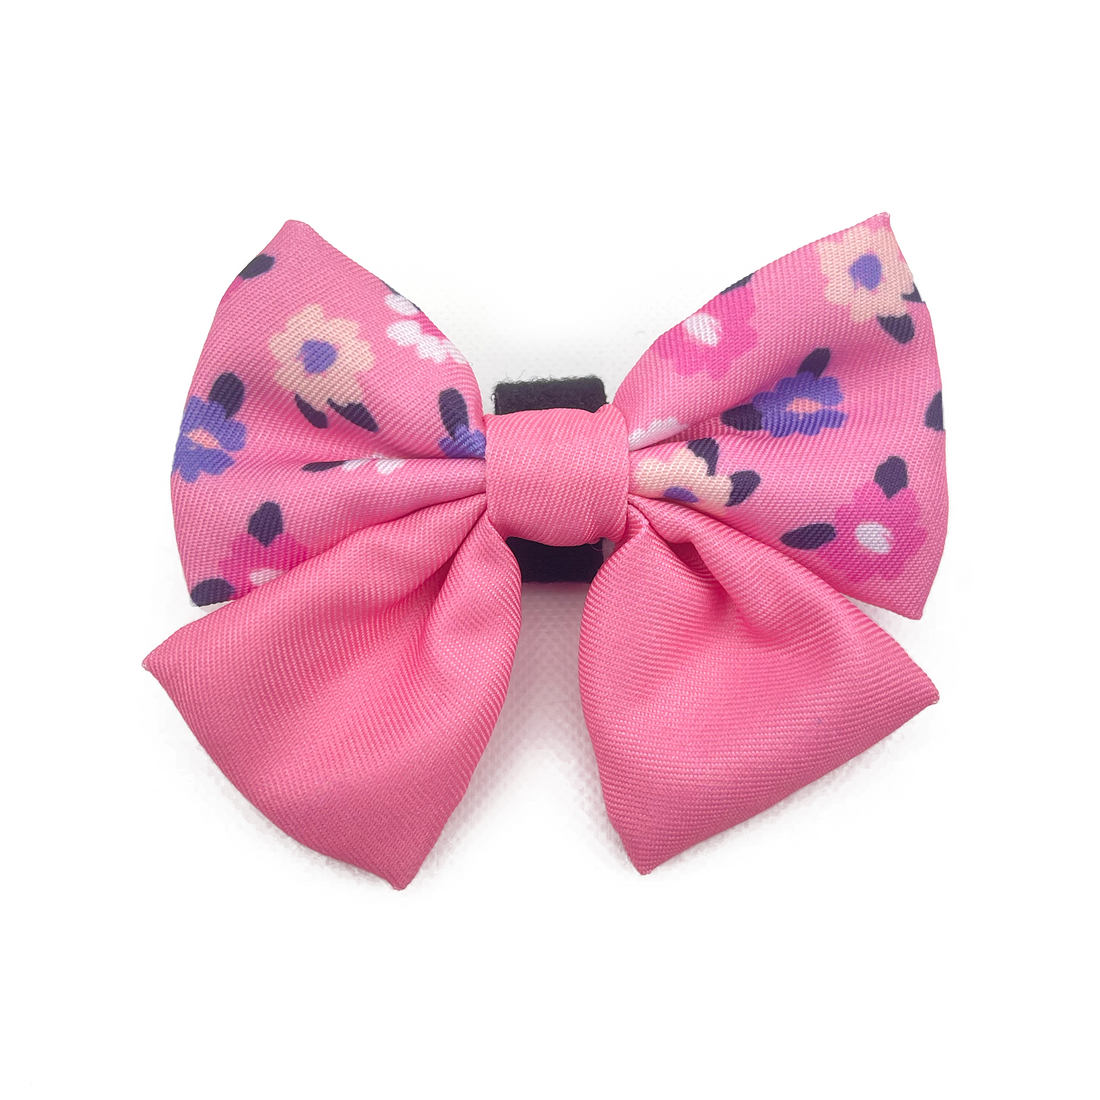 Sailor Bow Tie // On Wednesday&